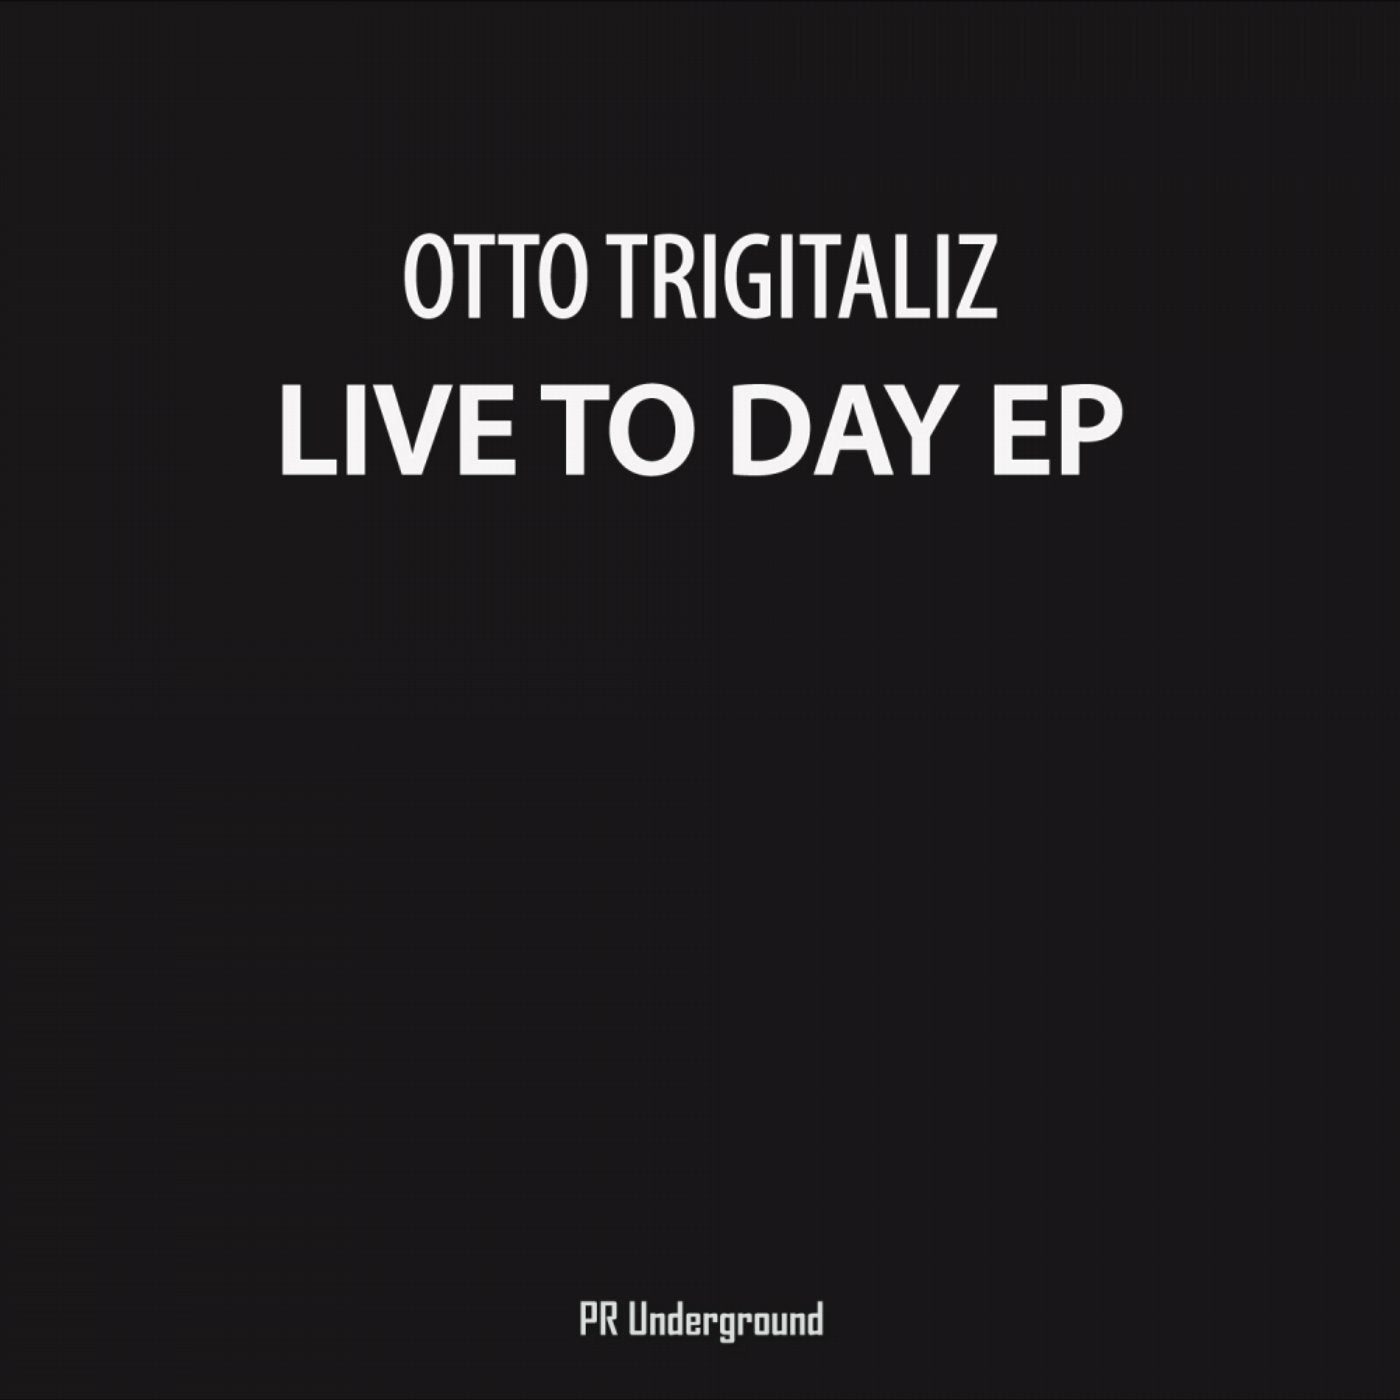 Live to Day EP